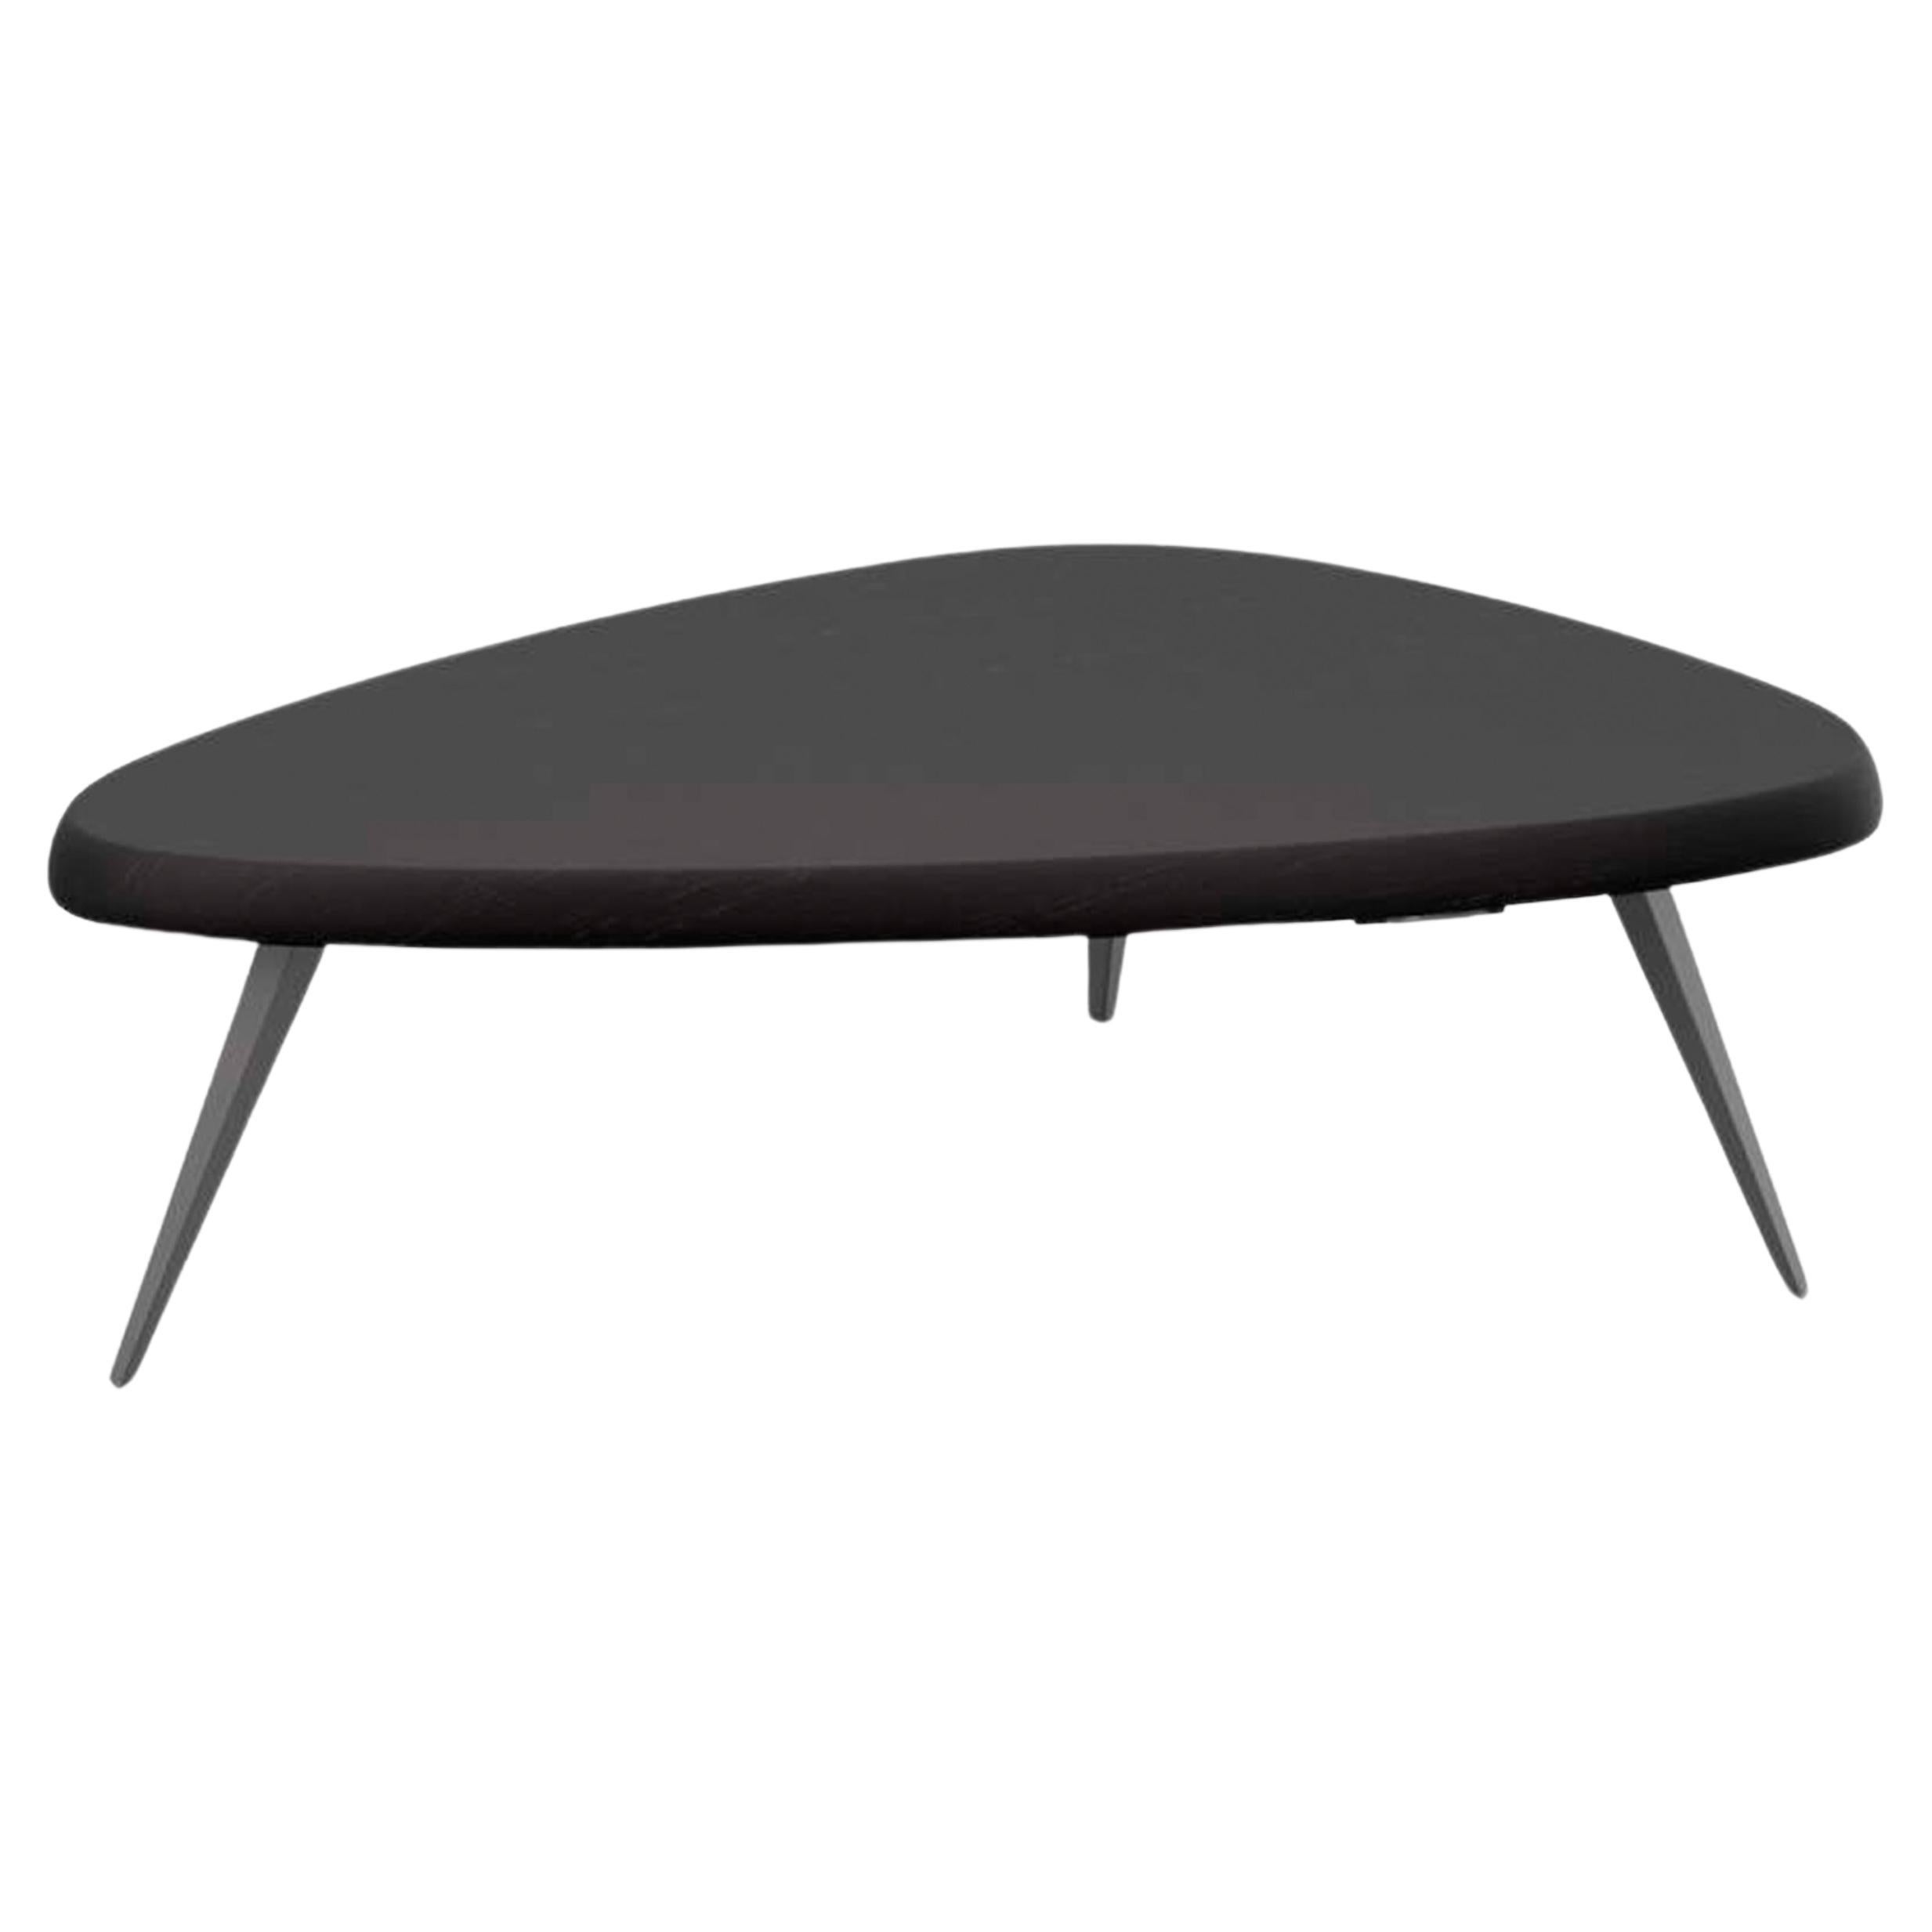 Mexique Coffe Table PRO, by Charlotte Perriand for Cassina